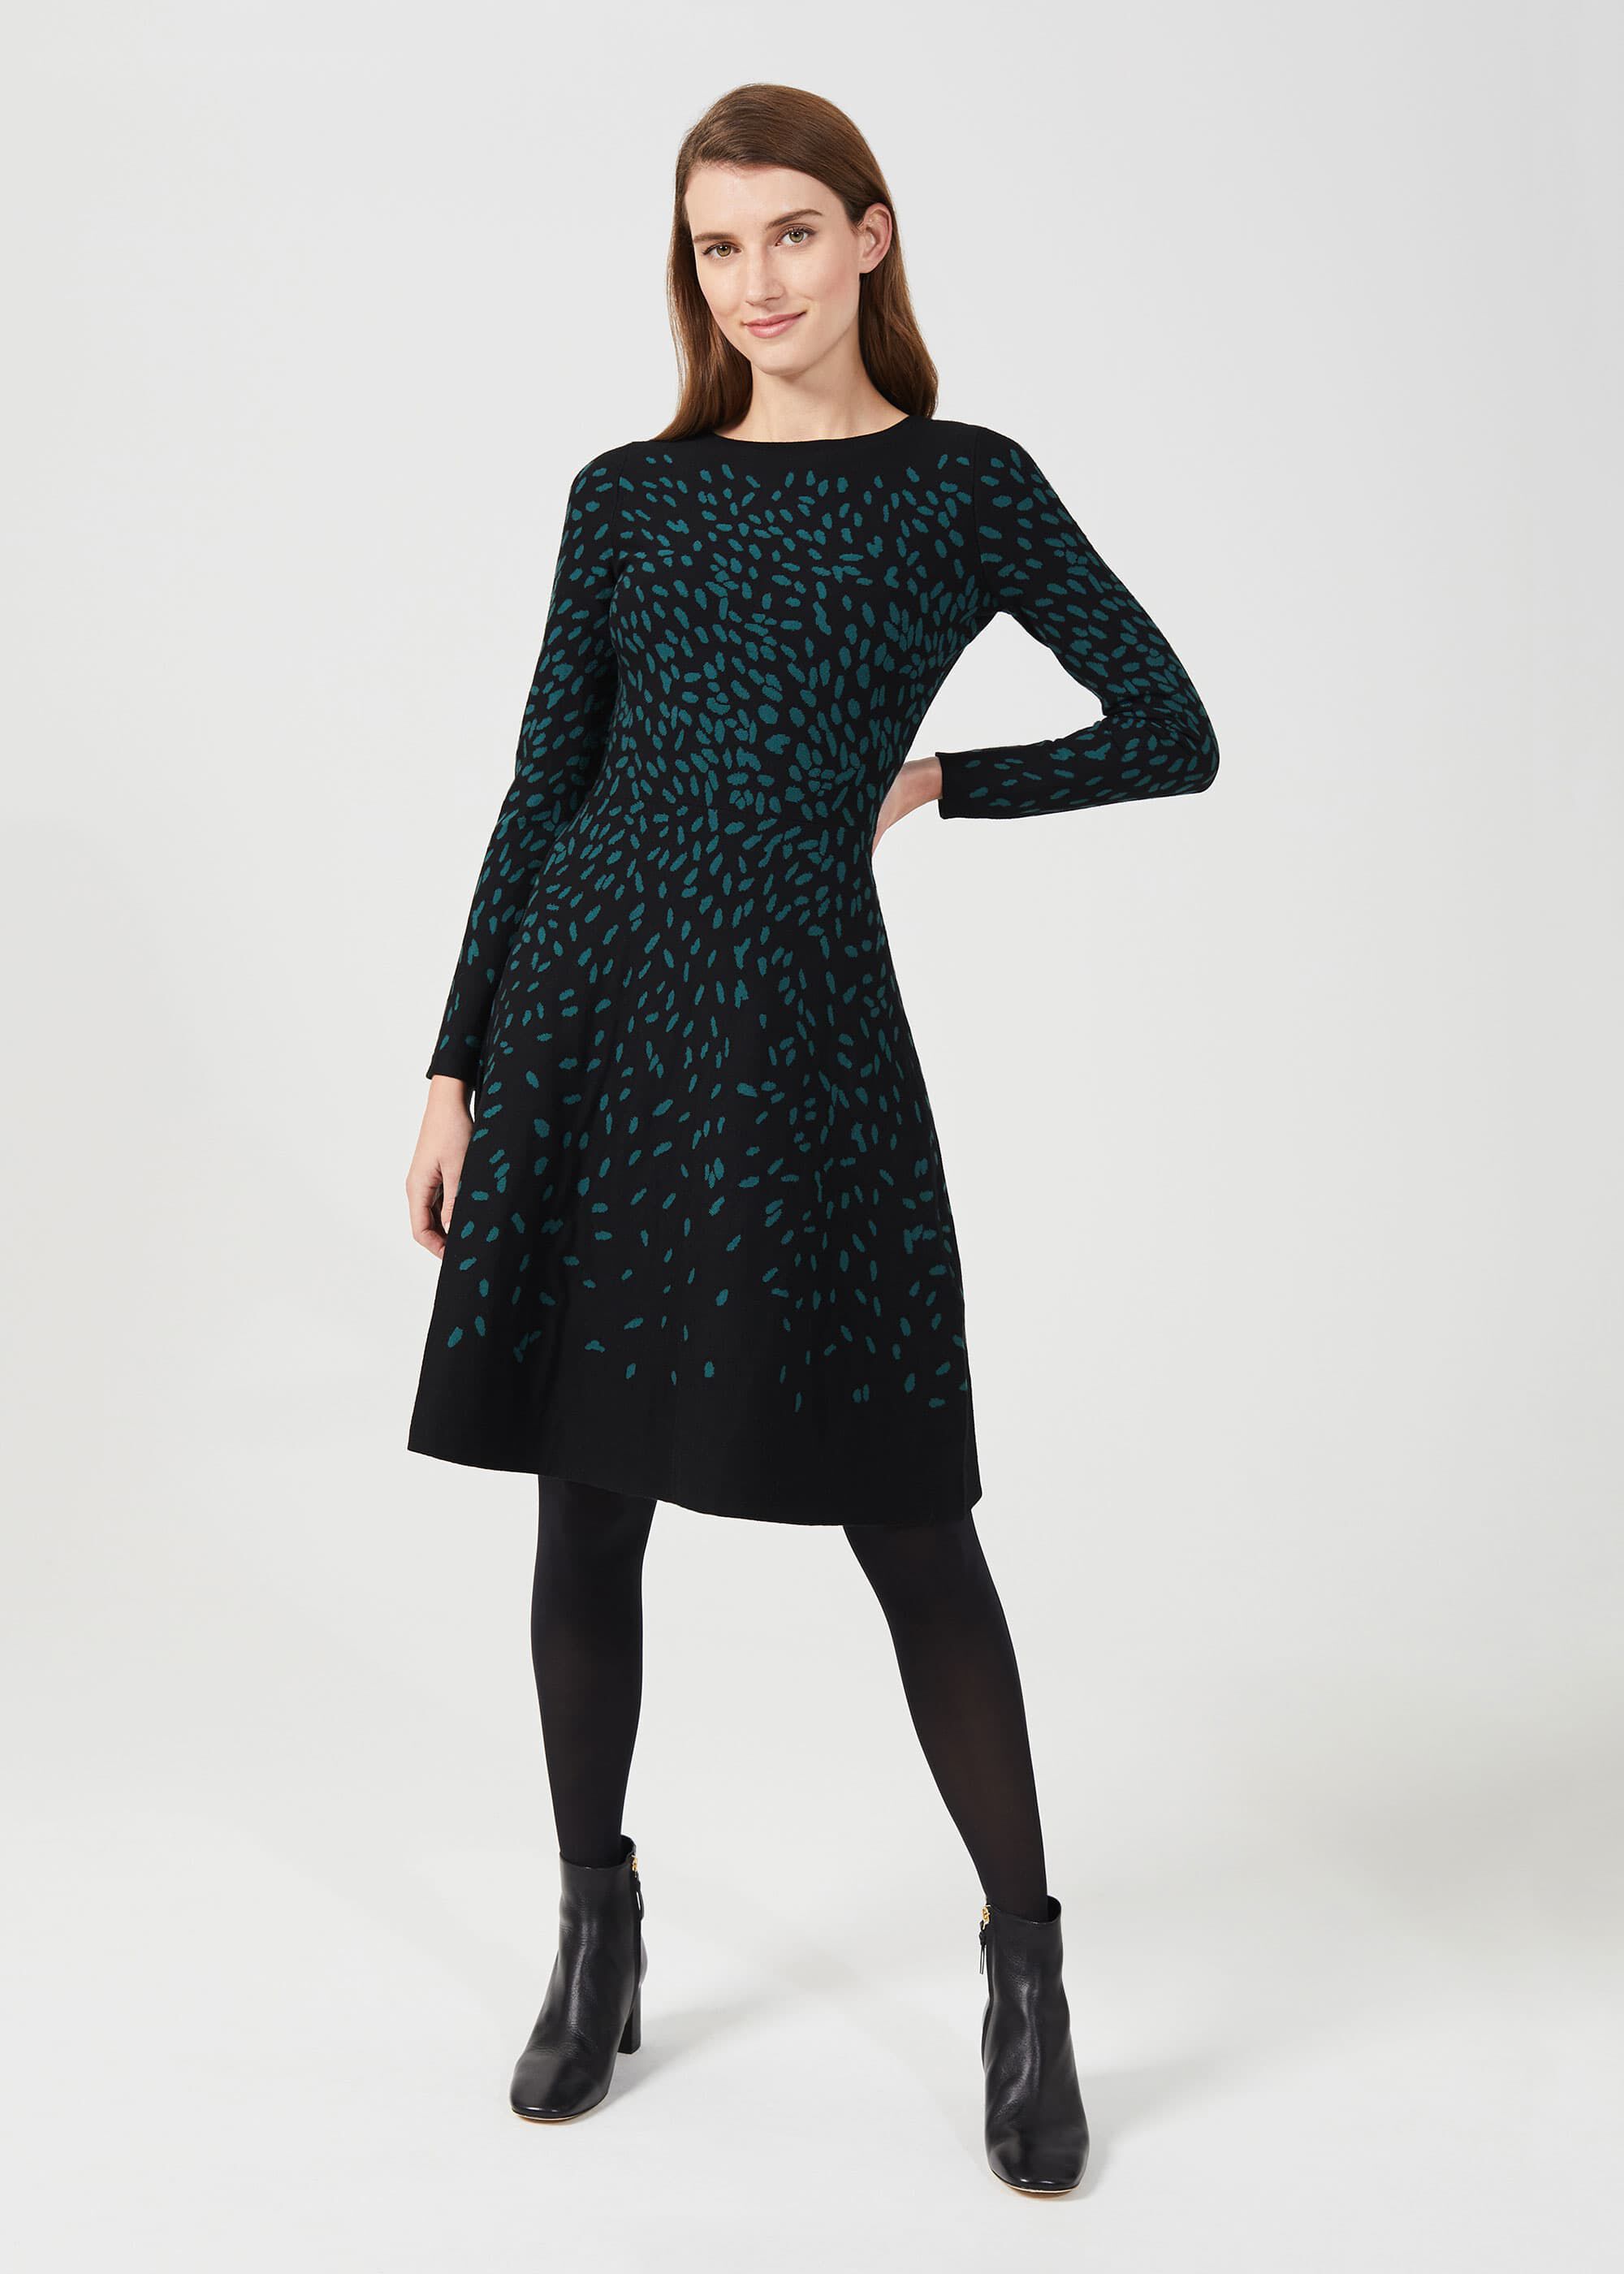 Hobbs New In Dresses Outlet, 44% OFF | www.enaco.com.pe